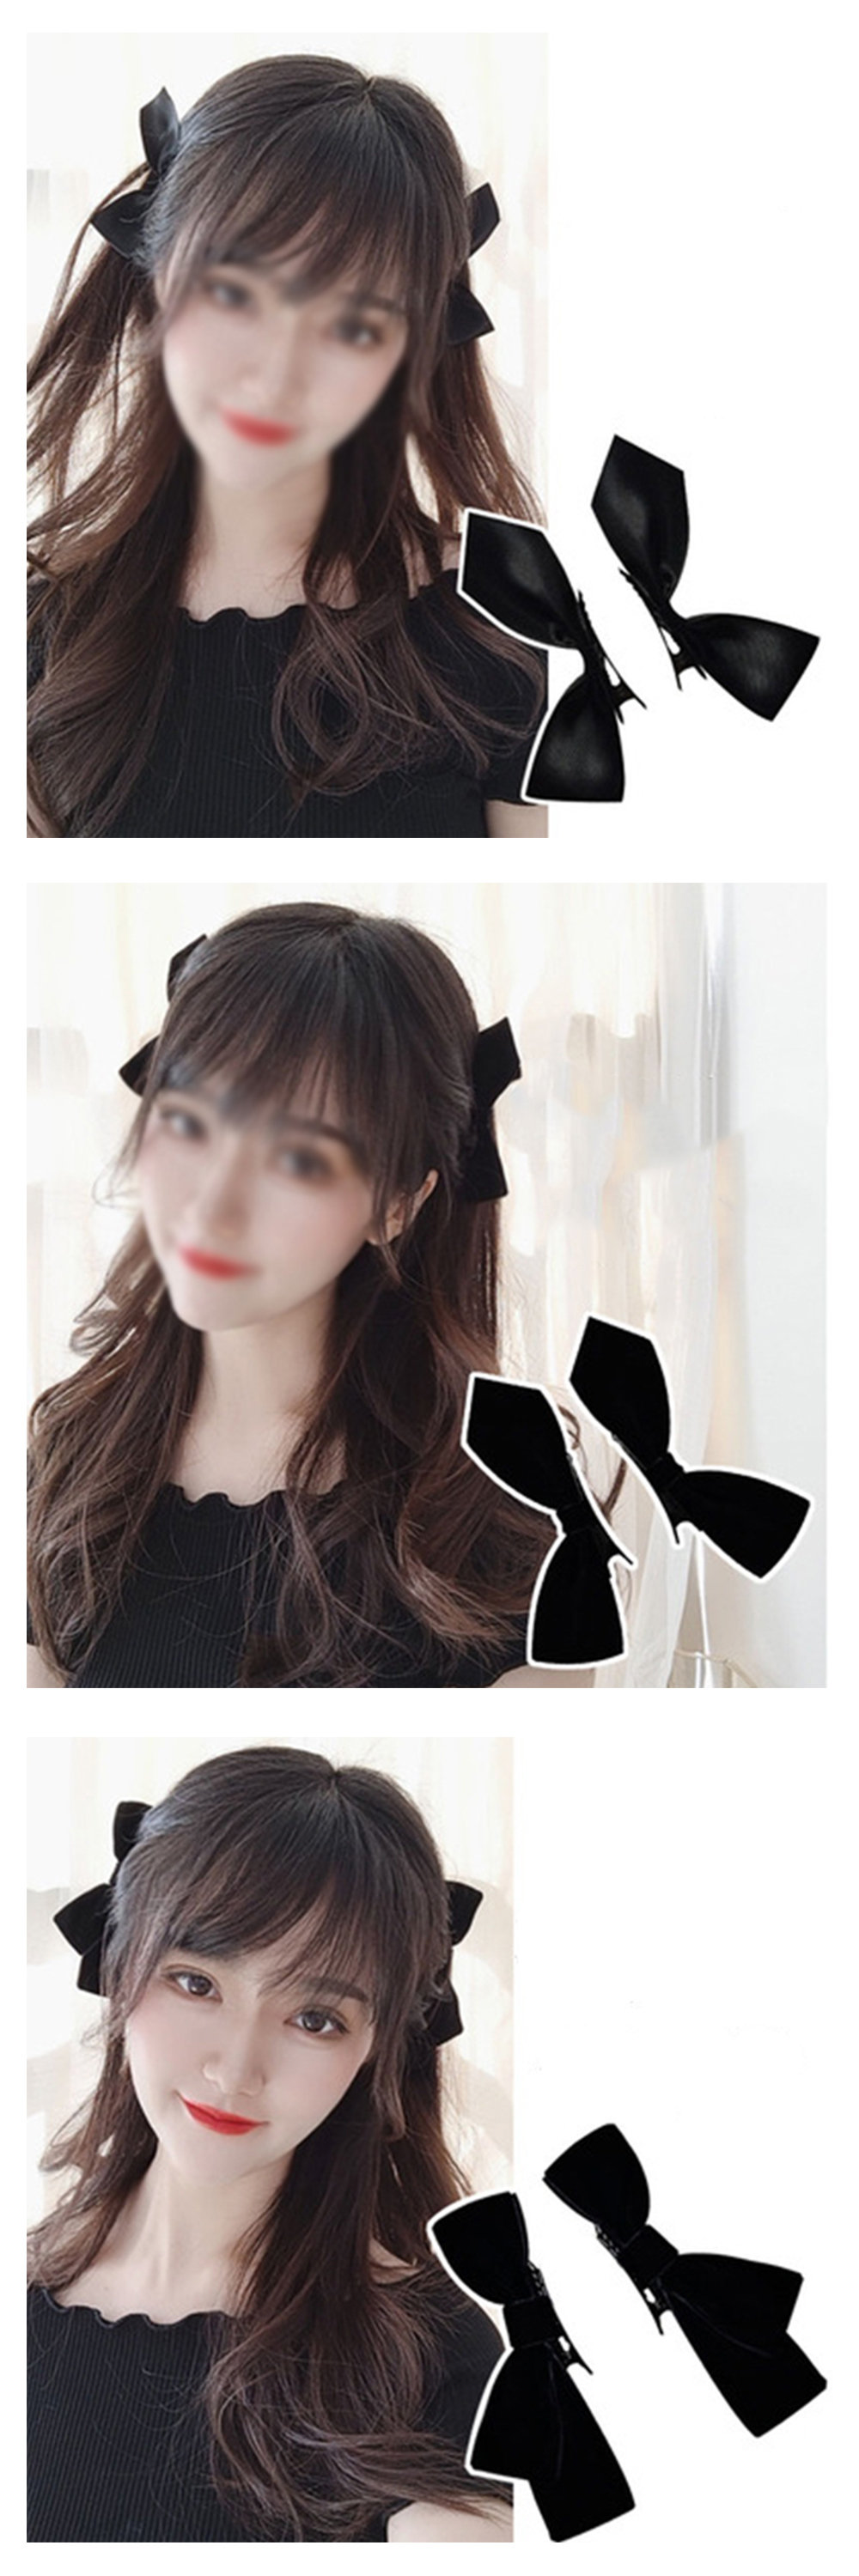 120 Disposable Black No Bend Hair Clips Korean Style Hairpins For Brides  From Alondra, $5.75